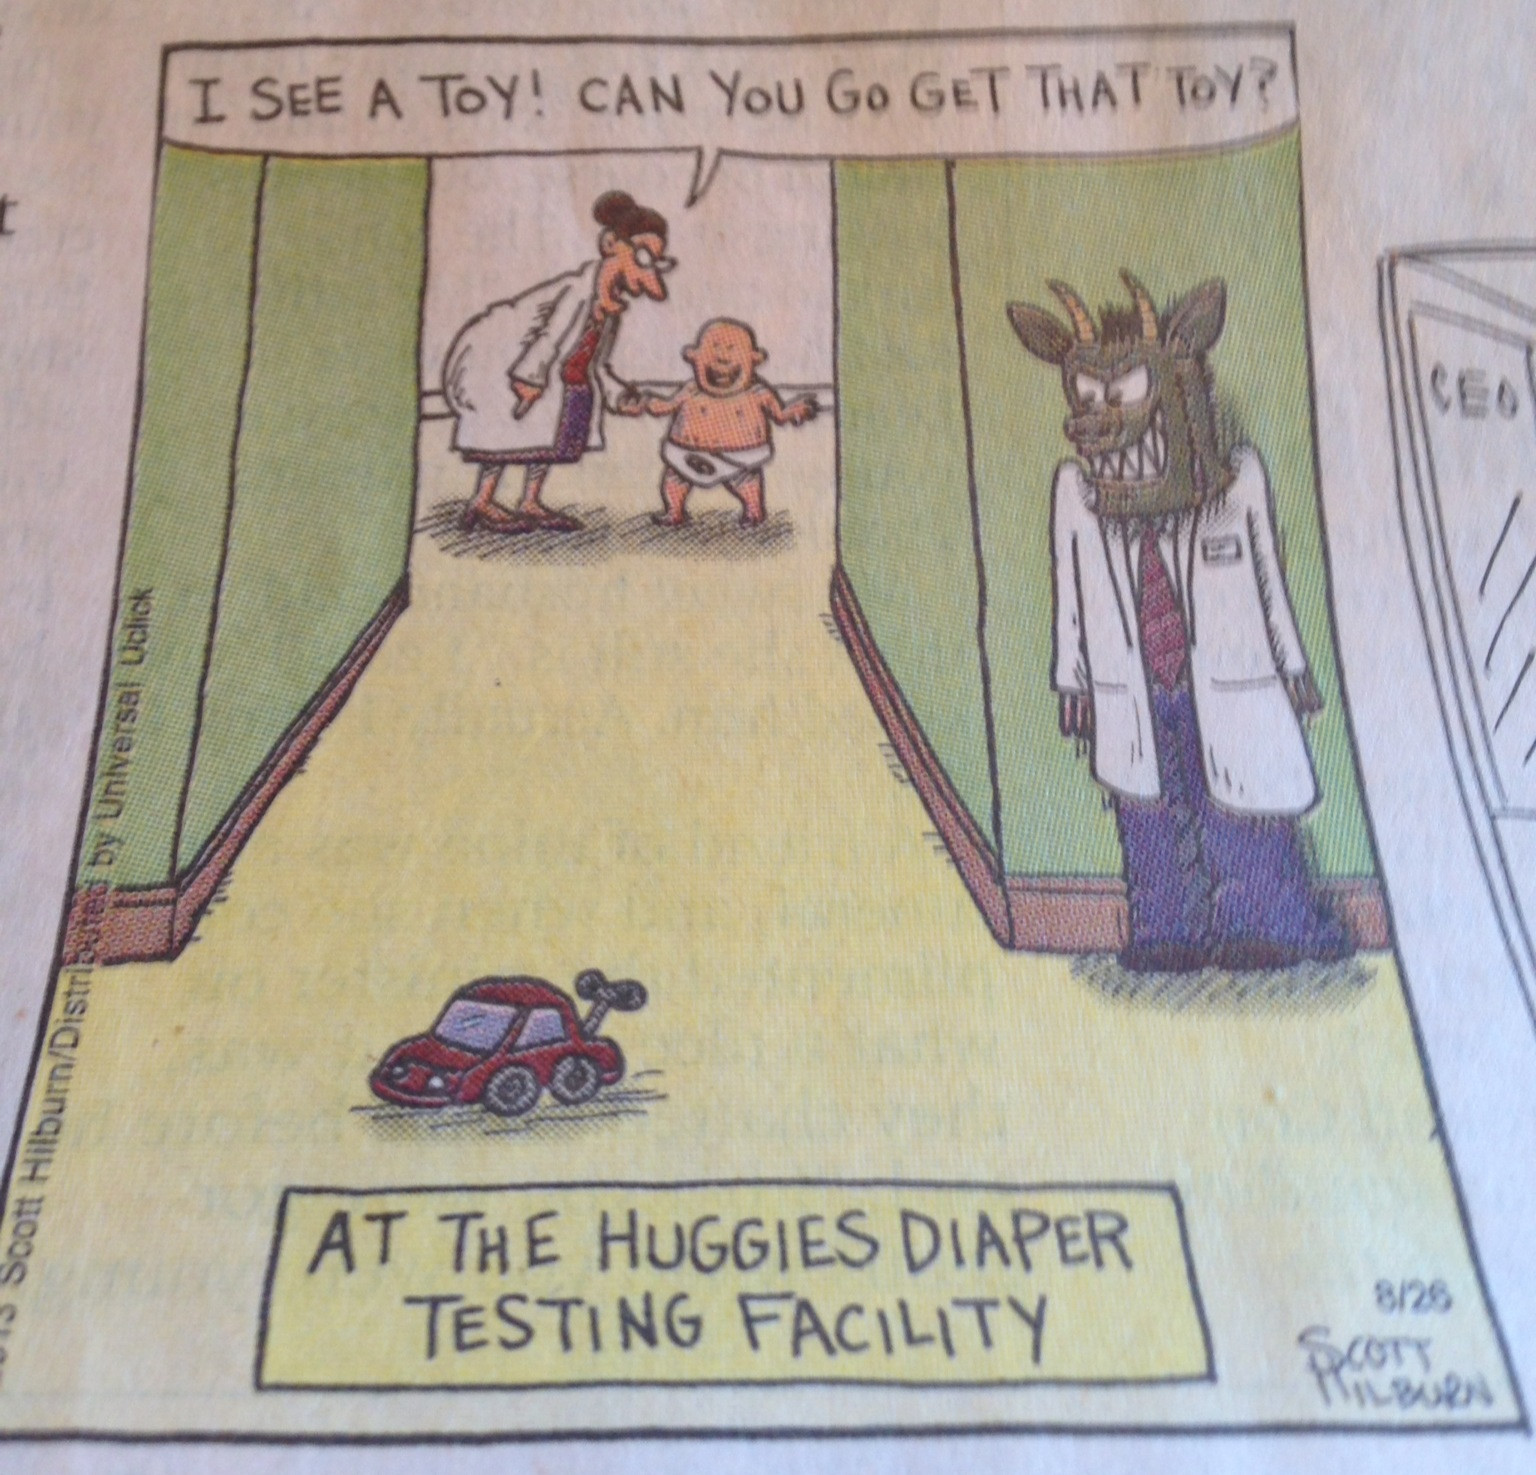 One of the funniest newspaper comics I've seen in a while